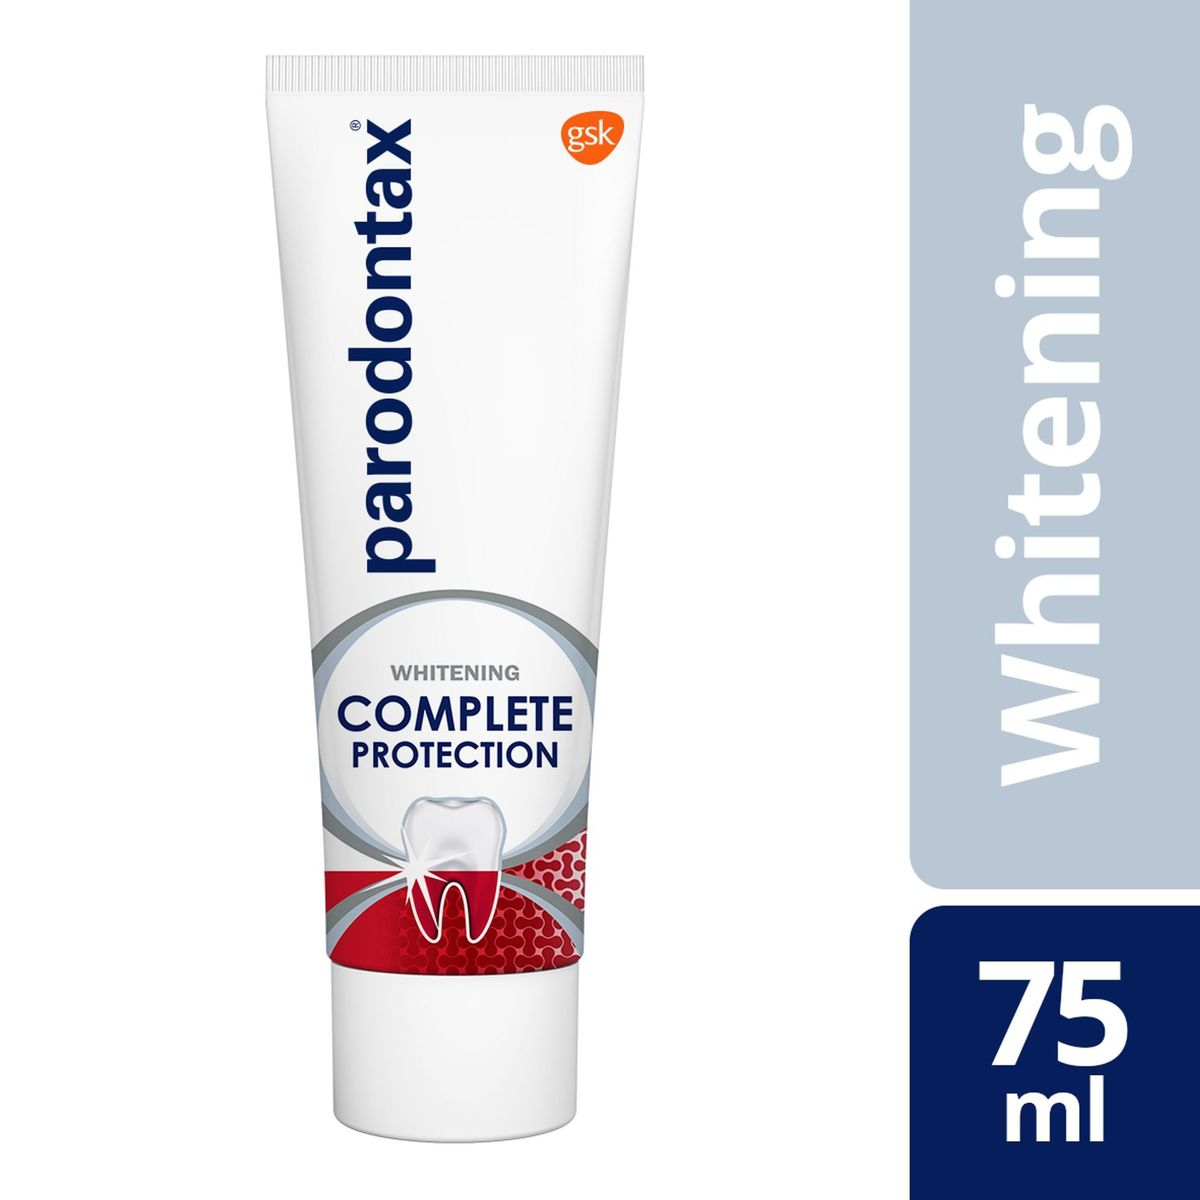 Parodontax Dentifrice Complete Protection Whitening 75 ml